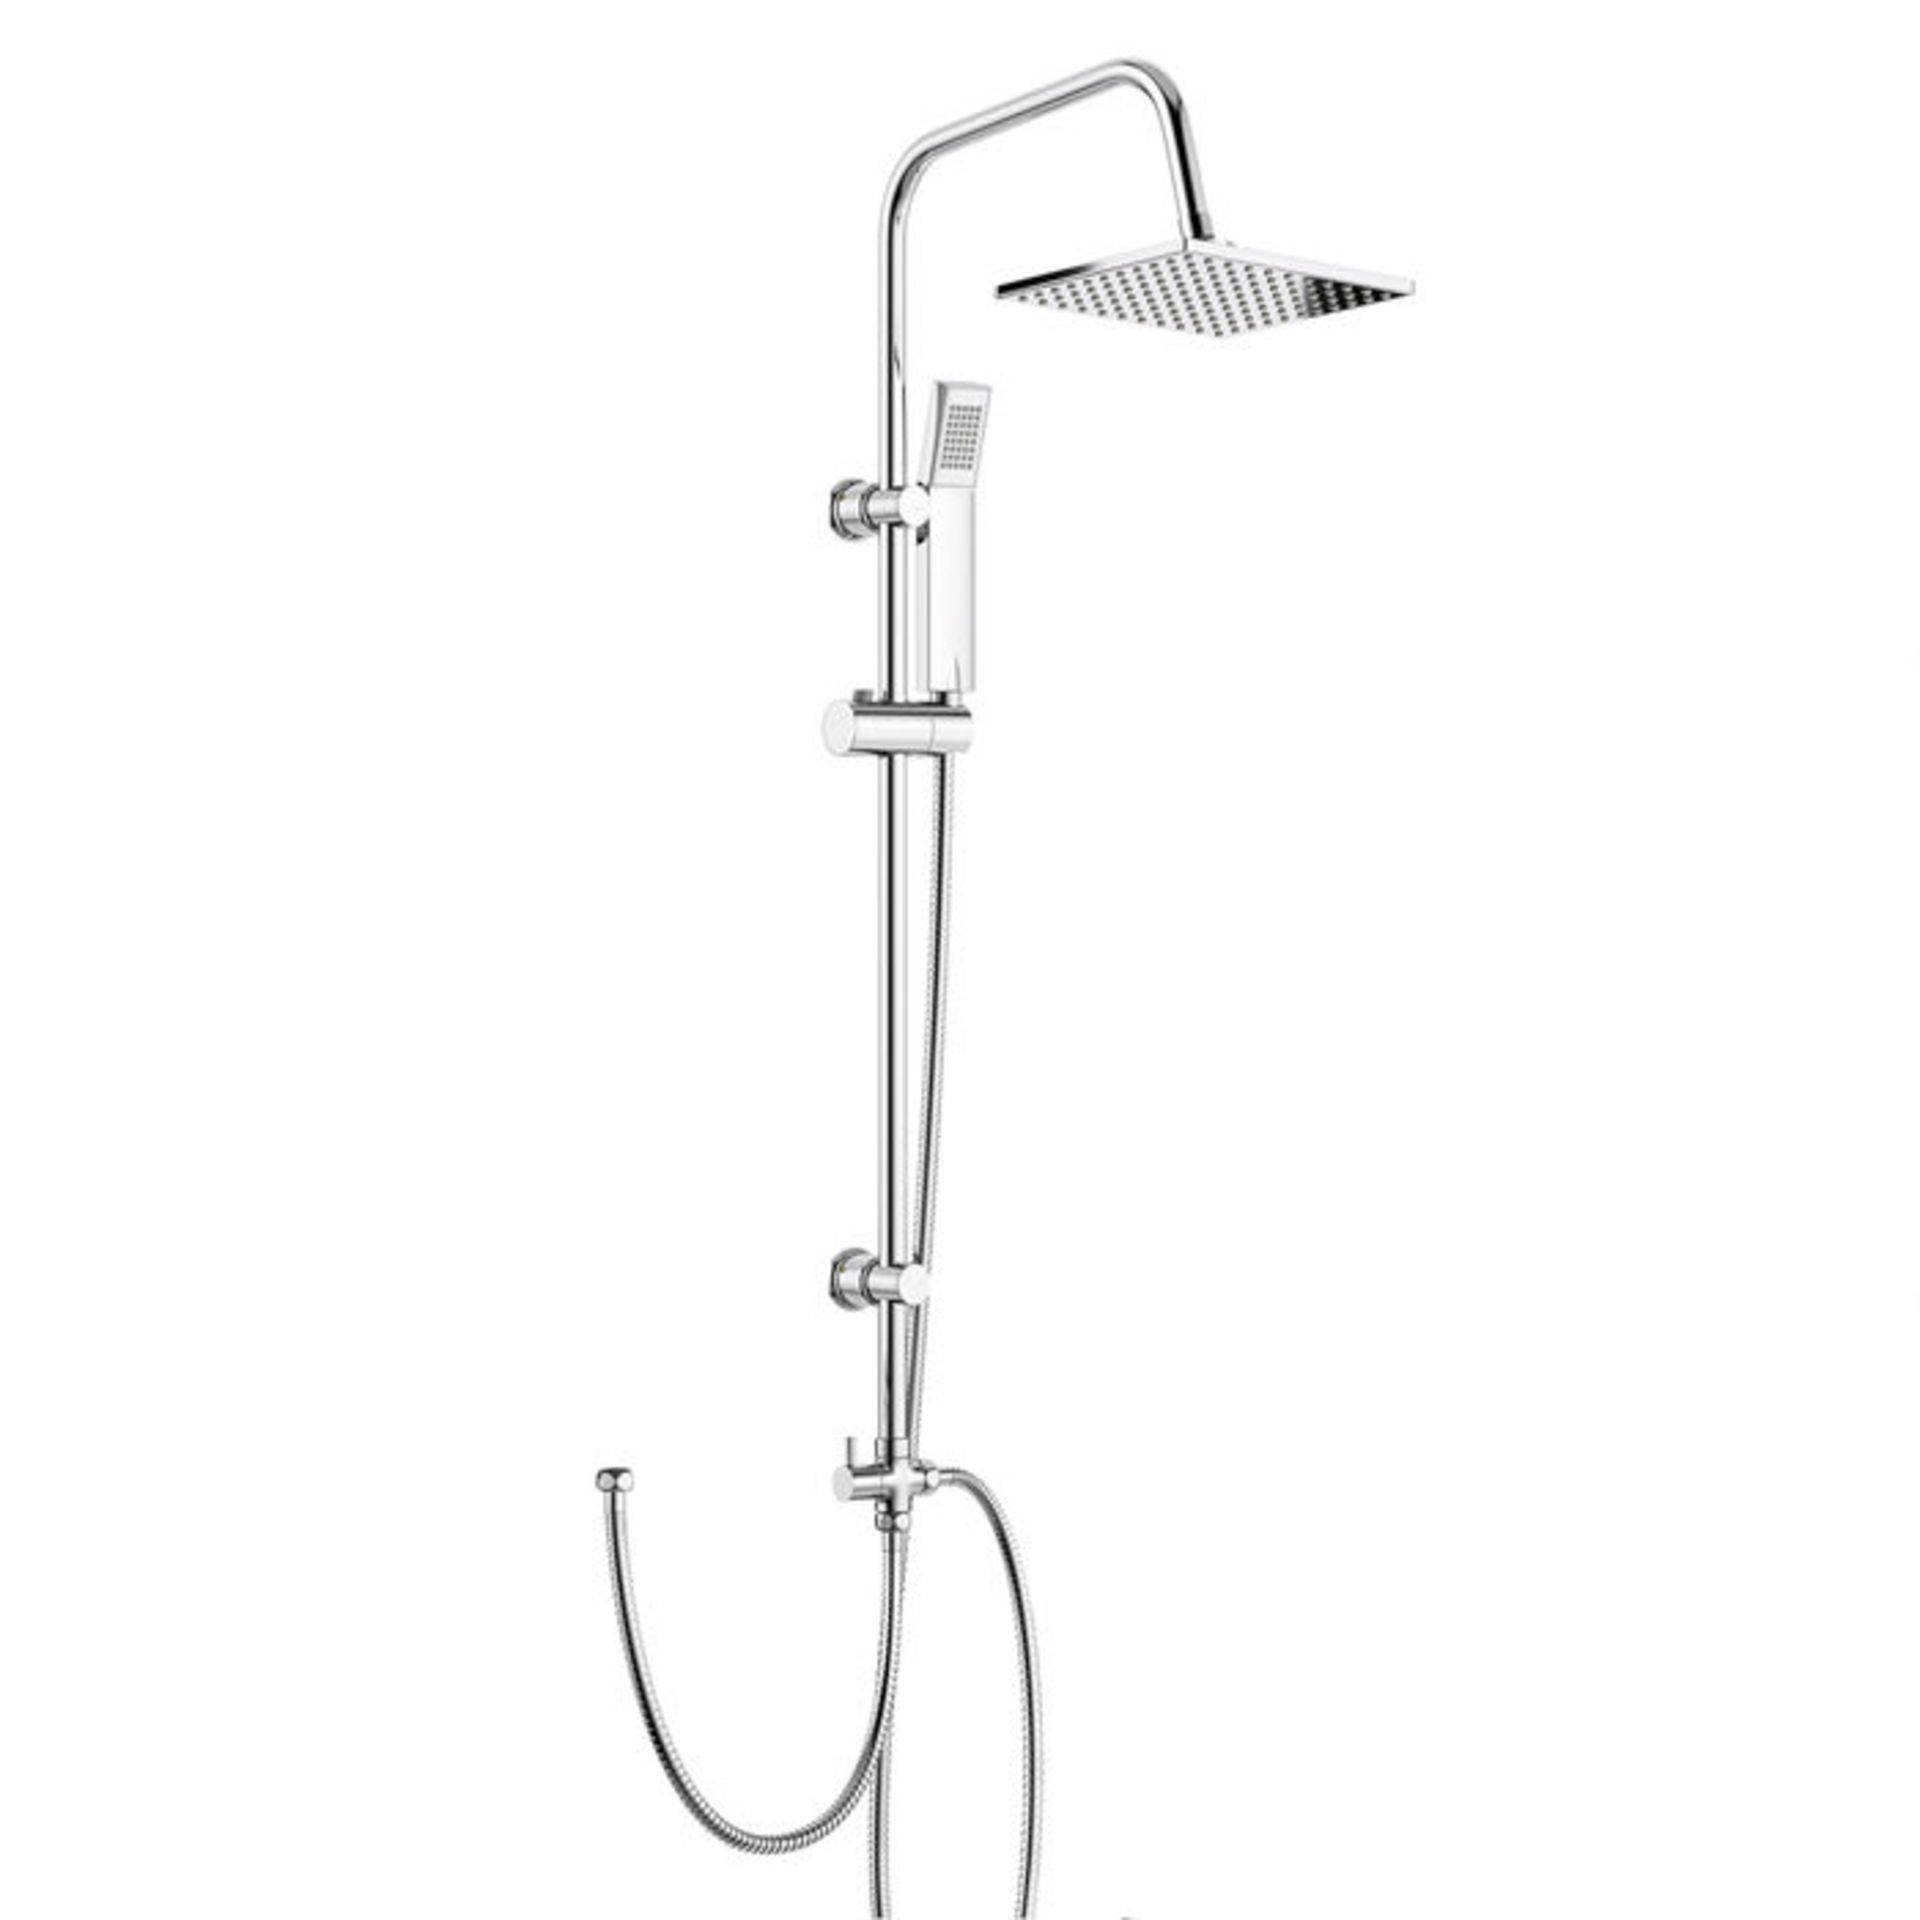 (P134) 200mm Square Head, Riser Rail Handheld Kit Quality stainless steel shower head with Easy - Image 2 of 4